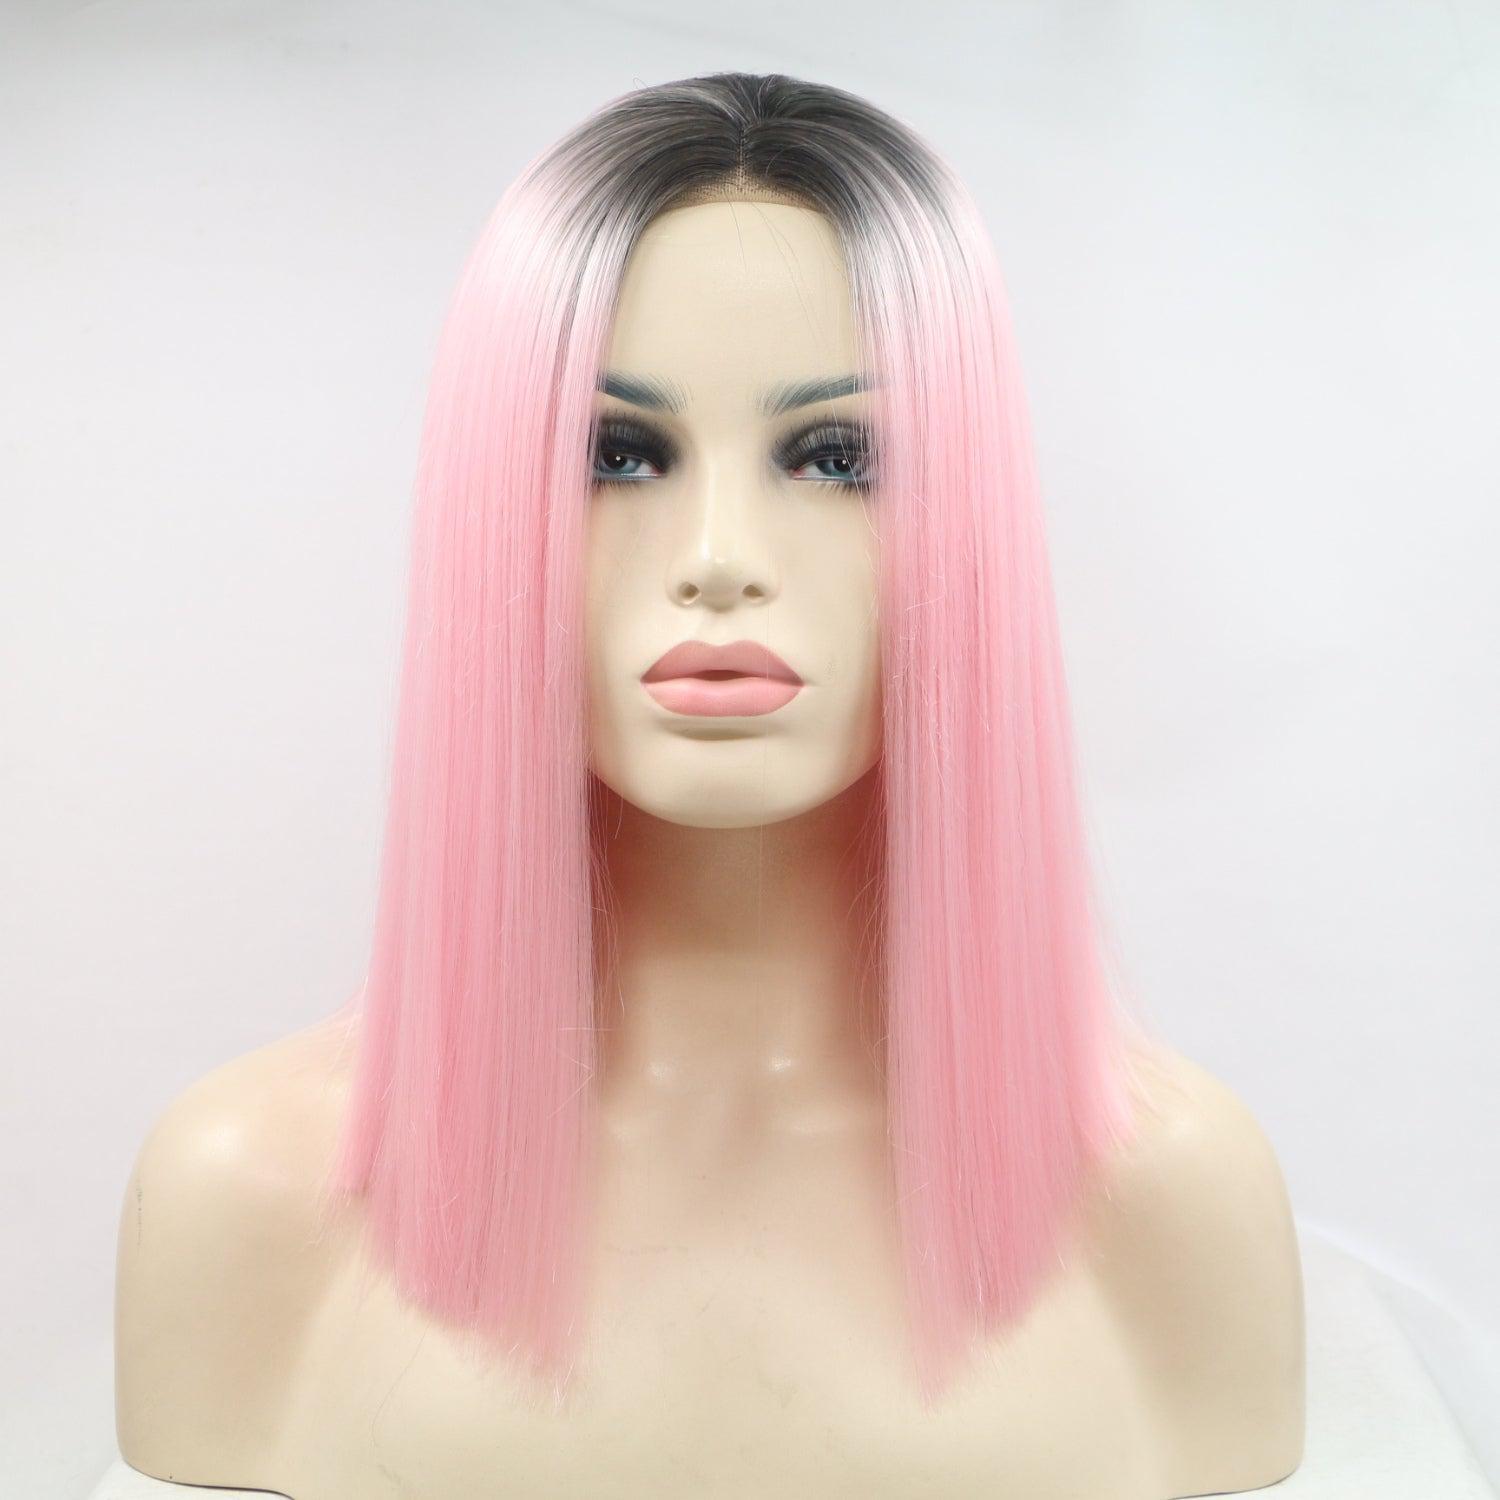 a mannequin head with pink and black hair